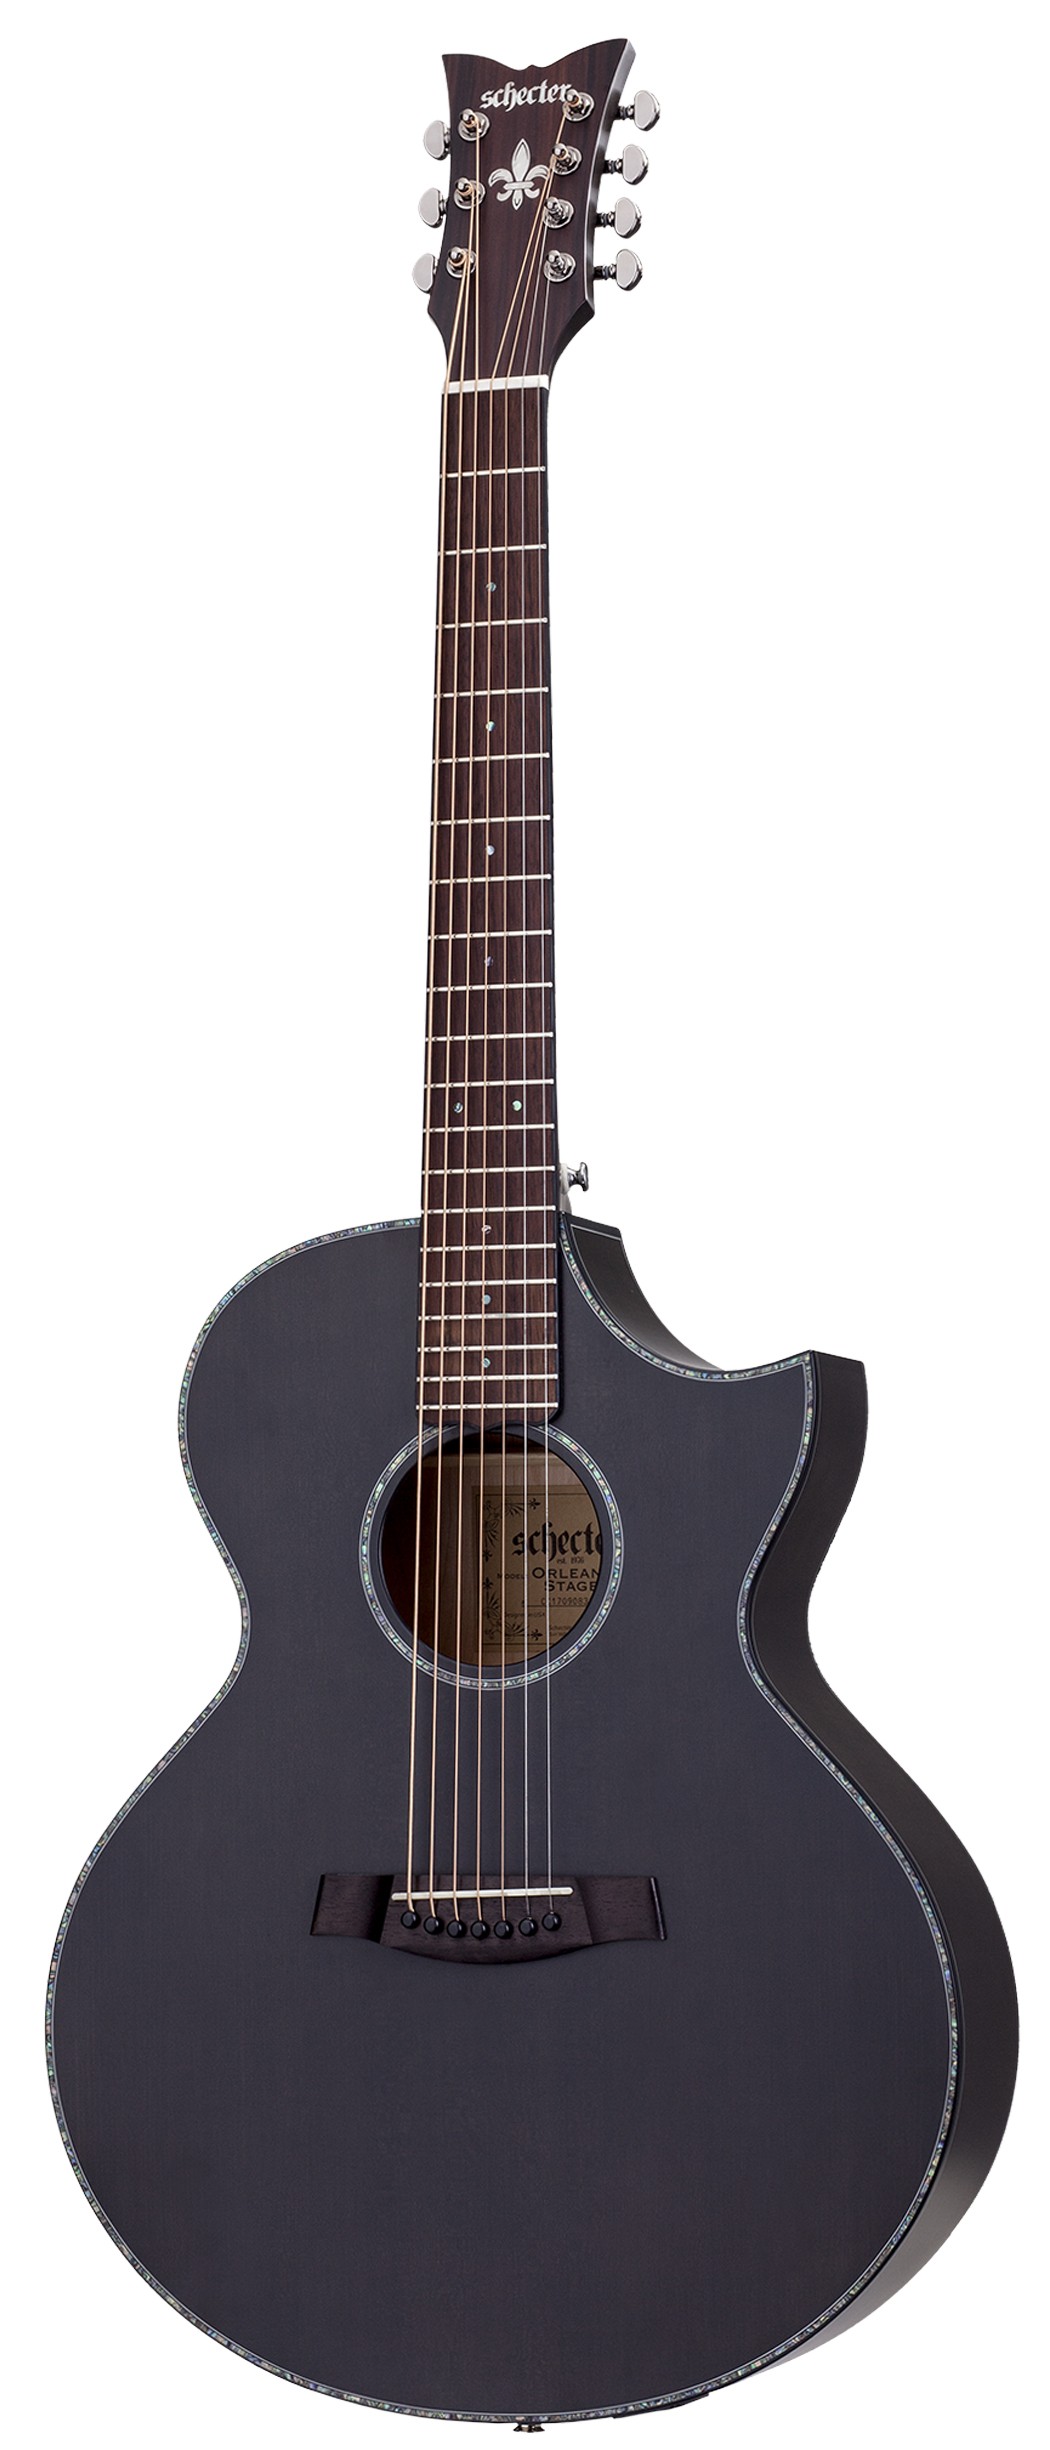 Orleans Stage-7 Acoustic